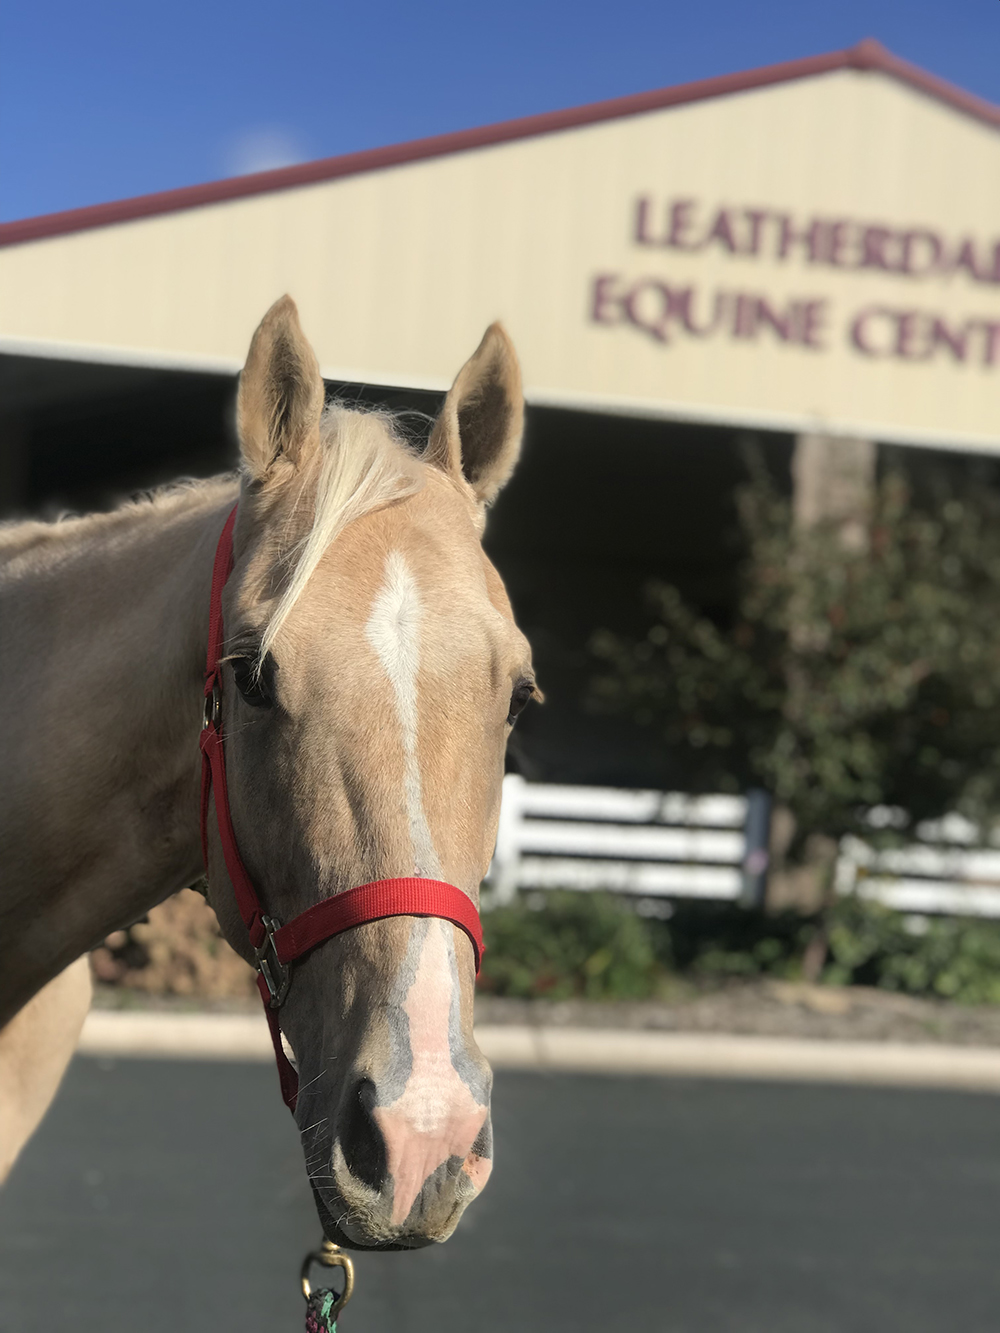 Zeus the horse in front of Leatherdale Equine Center